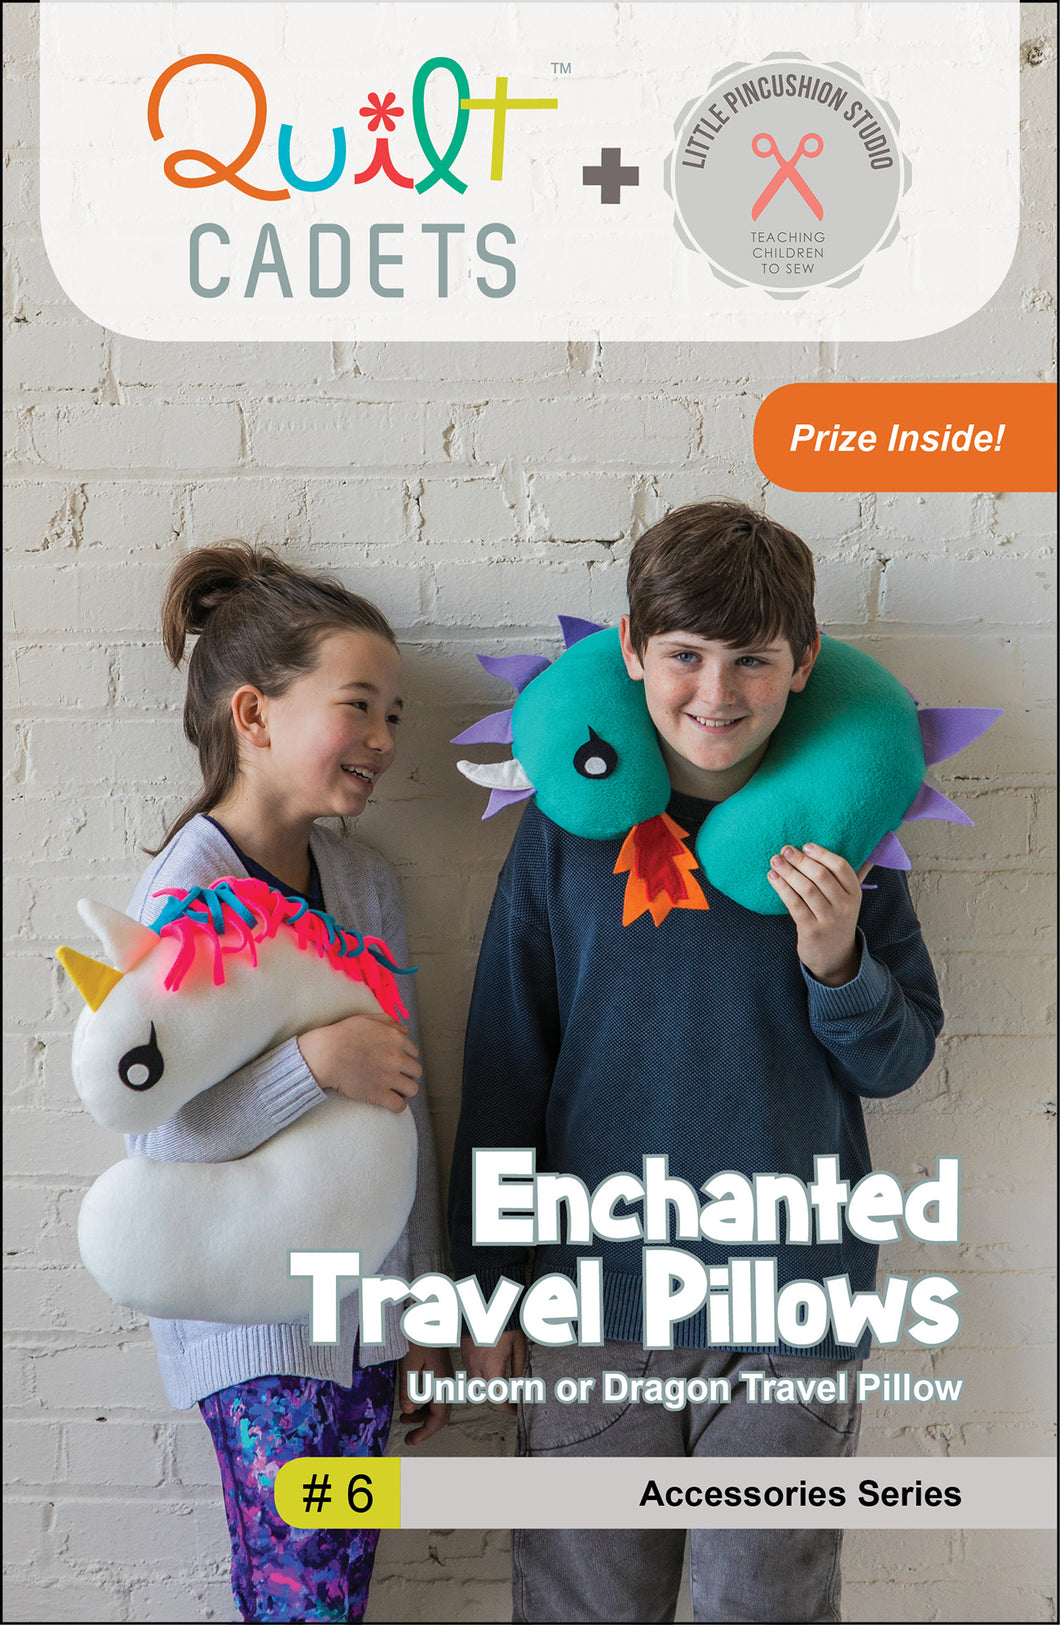 Quilt Cadets - Enchanted Travel Pillows